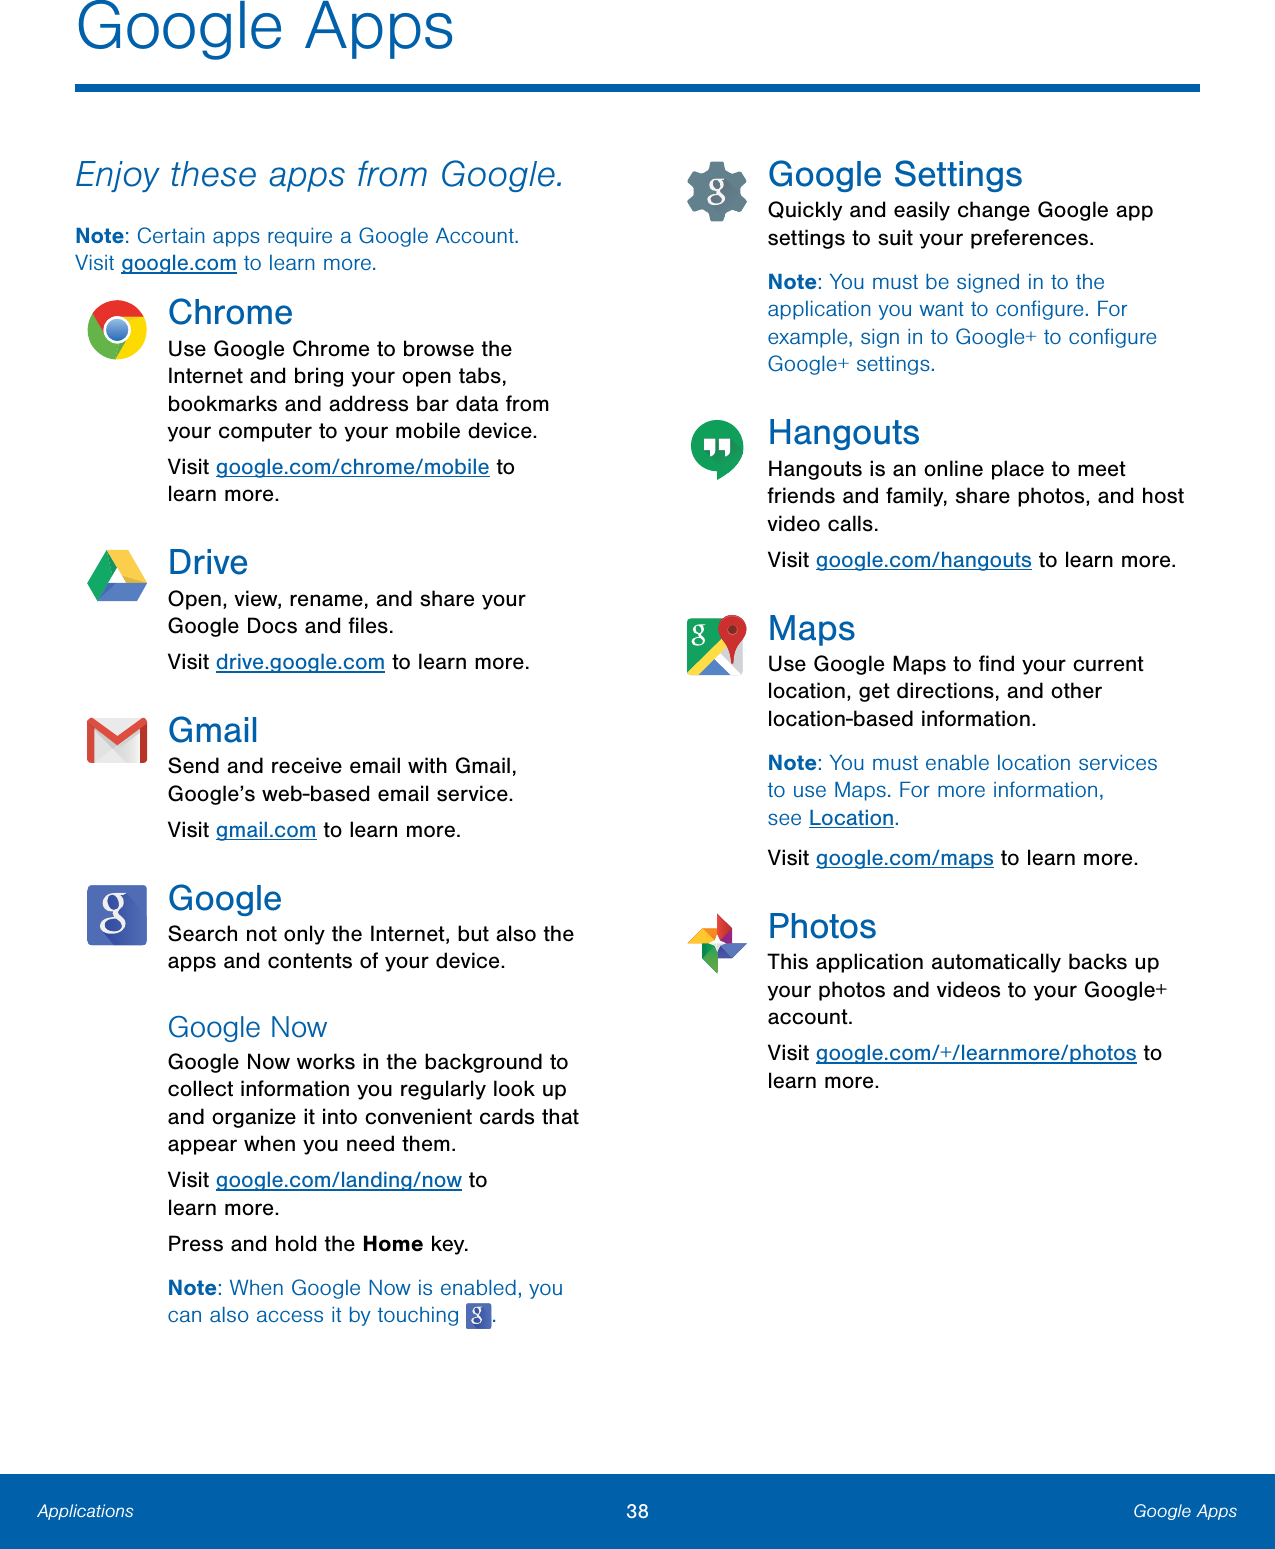 38  Google Apps Applications   Google Apps  Enjoy these apps from Google. Note: Certain apps require a Google Account. Visitgoogle.com to learn more. Chrome Use Google Chrome to browse the Internet and bring your open tabs, bookmarks and address bar data from your computer to your mobile device. Visit google.com/chrome/mobile to learnmore. Drive Open, view, rename, and share your  Google Docs and ﬁles.  Visit drive.google.com to learn more.  Gmail Send and receive email with Gmail, Google’s web-based email service. Visit gmail.com to learn more. Google Search not only the Internet, but also the apps and contents of your device. Google Now Google Now works in the background to  collect information you regularly look up  and organize it into convenient cards that  appear when you need them.  Visit google.com/landing/now to  learnmore.  Press and hold the Home key.  Note: When Google Now is enabled, you can also access it by touching  . Google Settings Quickly and easily change Google app settings to suit your preferences. Note: You must be signed in to the application you want to conﬁgure. For example, sign in to Google+ to conﬁgure Google+ settings. Hangouts Hangouts is an online place to meet friends and family, share photos, and host video calls. Visit google.com/hangouts to learn more. Maps Use Google Maps to ﬁnd your current location, get directions, and other location-based information. Note: You must enable location services to use Maps. For more information, seeLocation. Visit google.com/maps to learn more. Photos This application automatically backs up your photos and videos to your Google+ account. Visit google.com/+/learnmore/photos to learn more. 